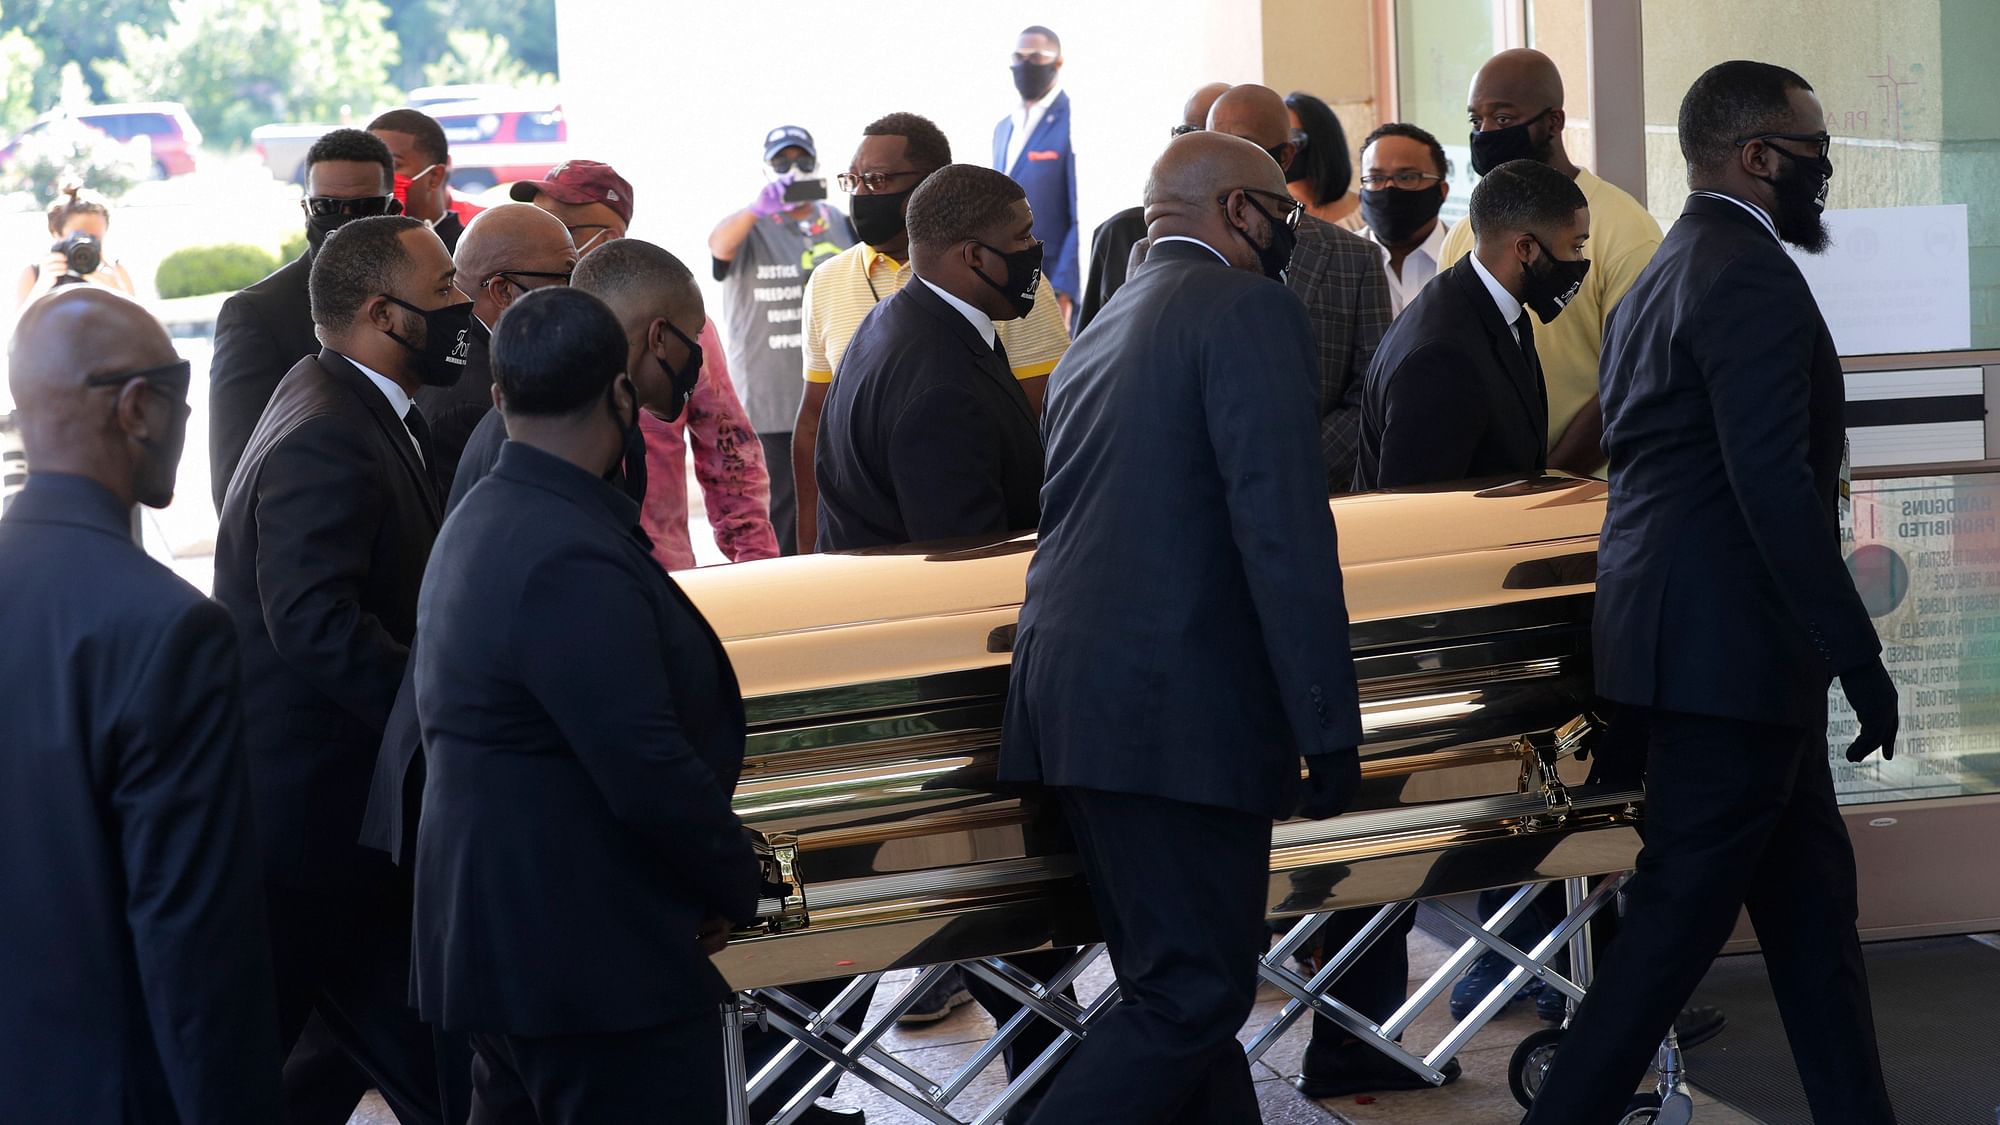 The casket of George Floyd arrived for a public memorial at The Fountain of Praise church in Houston, Monday.